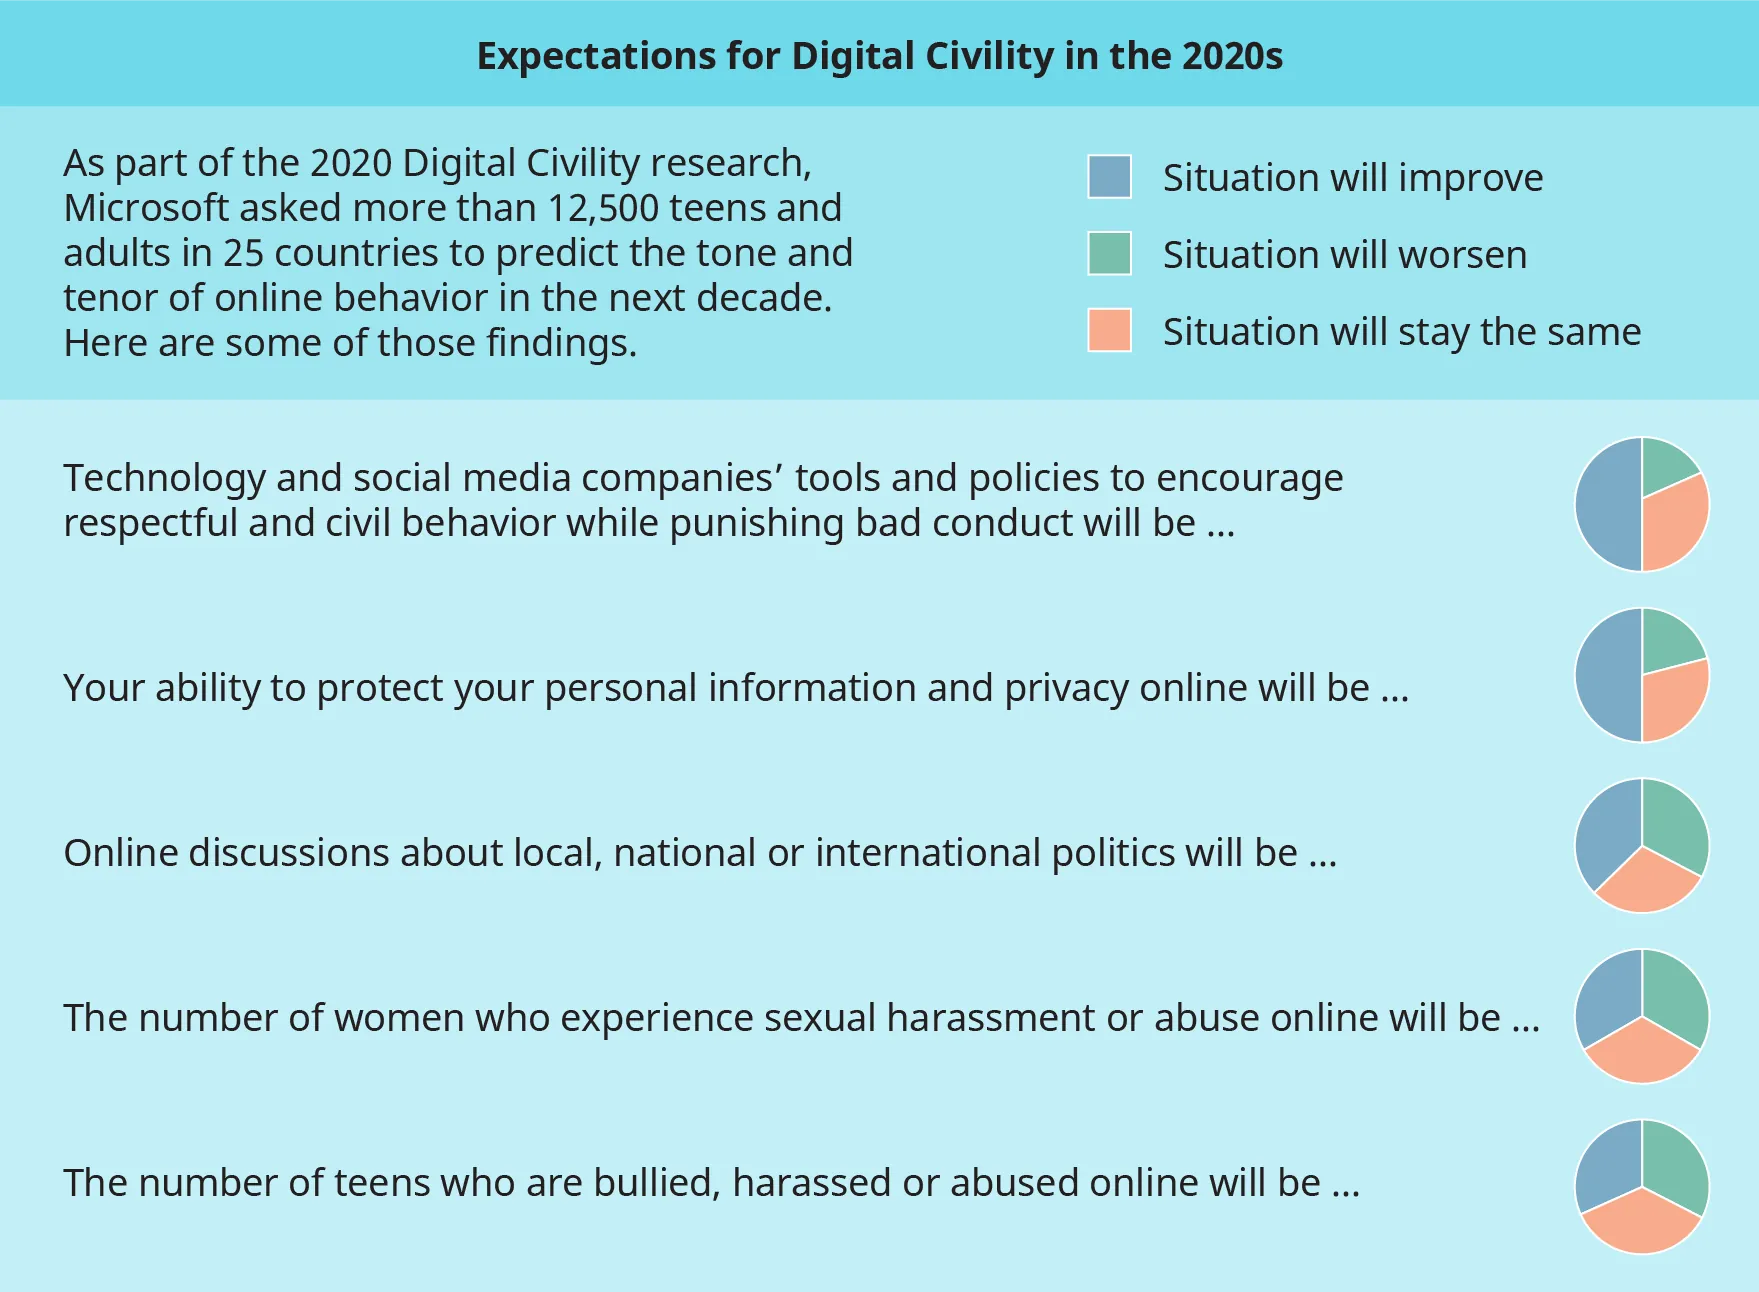 A chart illustrates the expectations for Digital Civility in the 2020s.